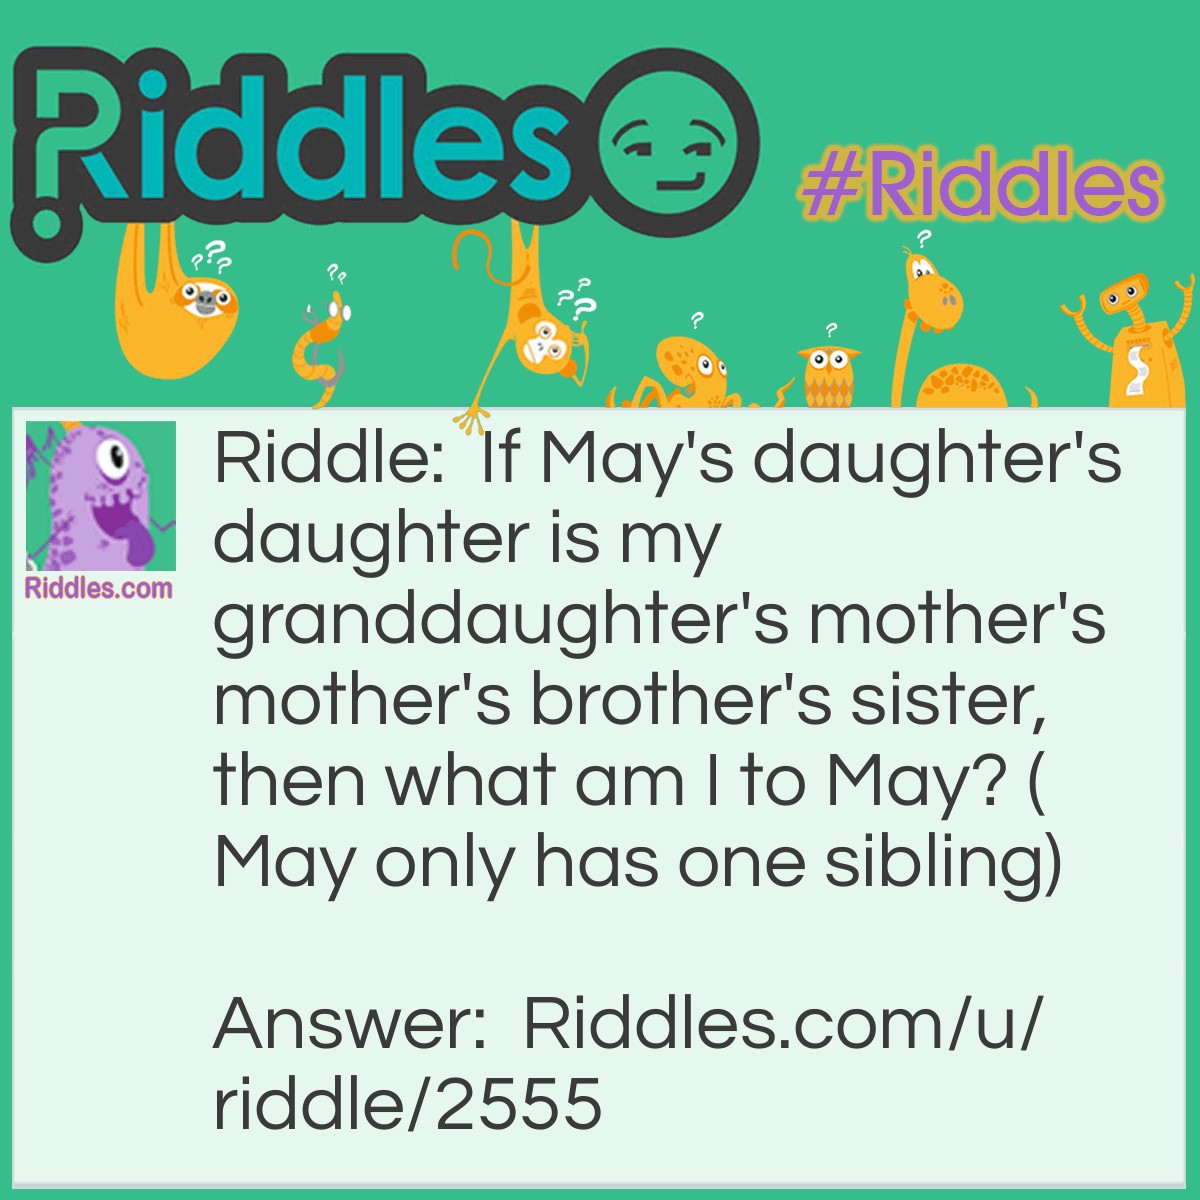 Riddle: If May's daughter's daughter is my granddaughter's mother's mother's brother's sister, then what am I to May? (May only has one sibling) Answer: I am May.